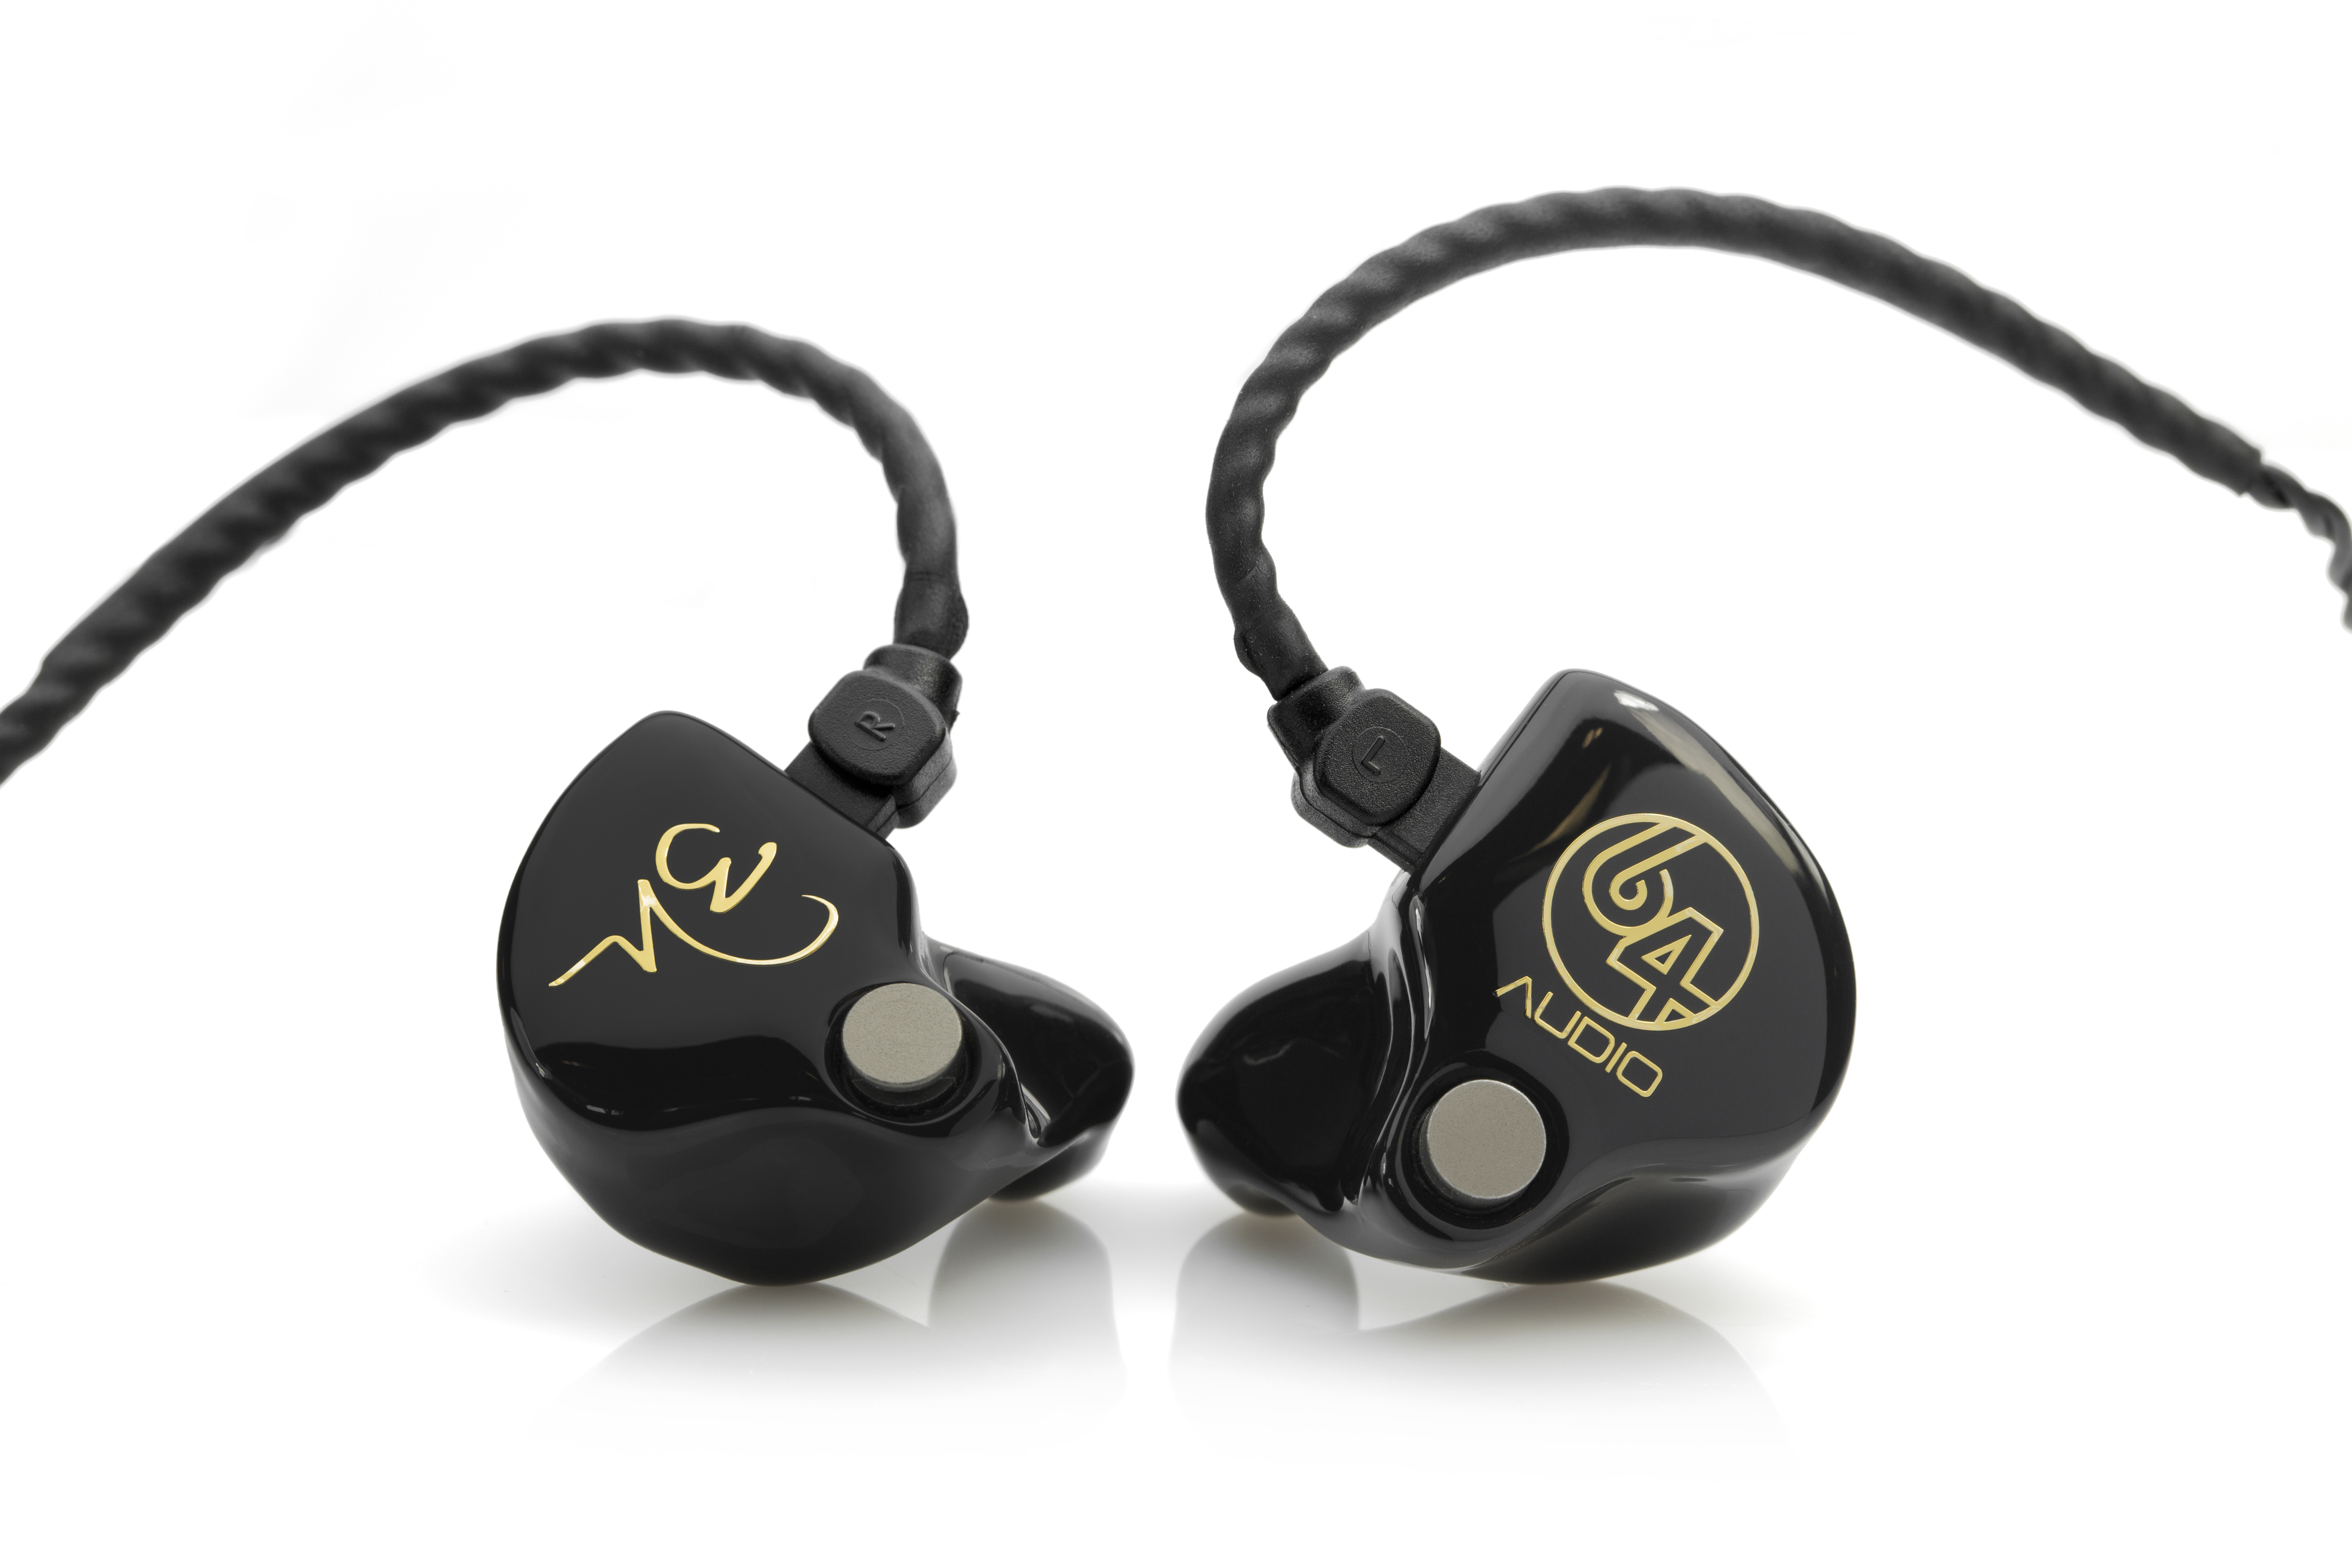 64 Audio Features New N8 Custom In-Ear Monitor at 2019 Winter NAMM 